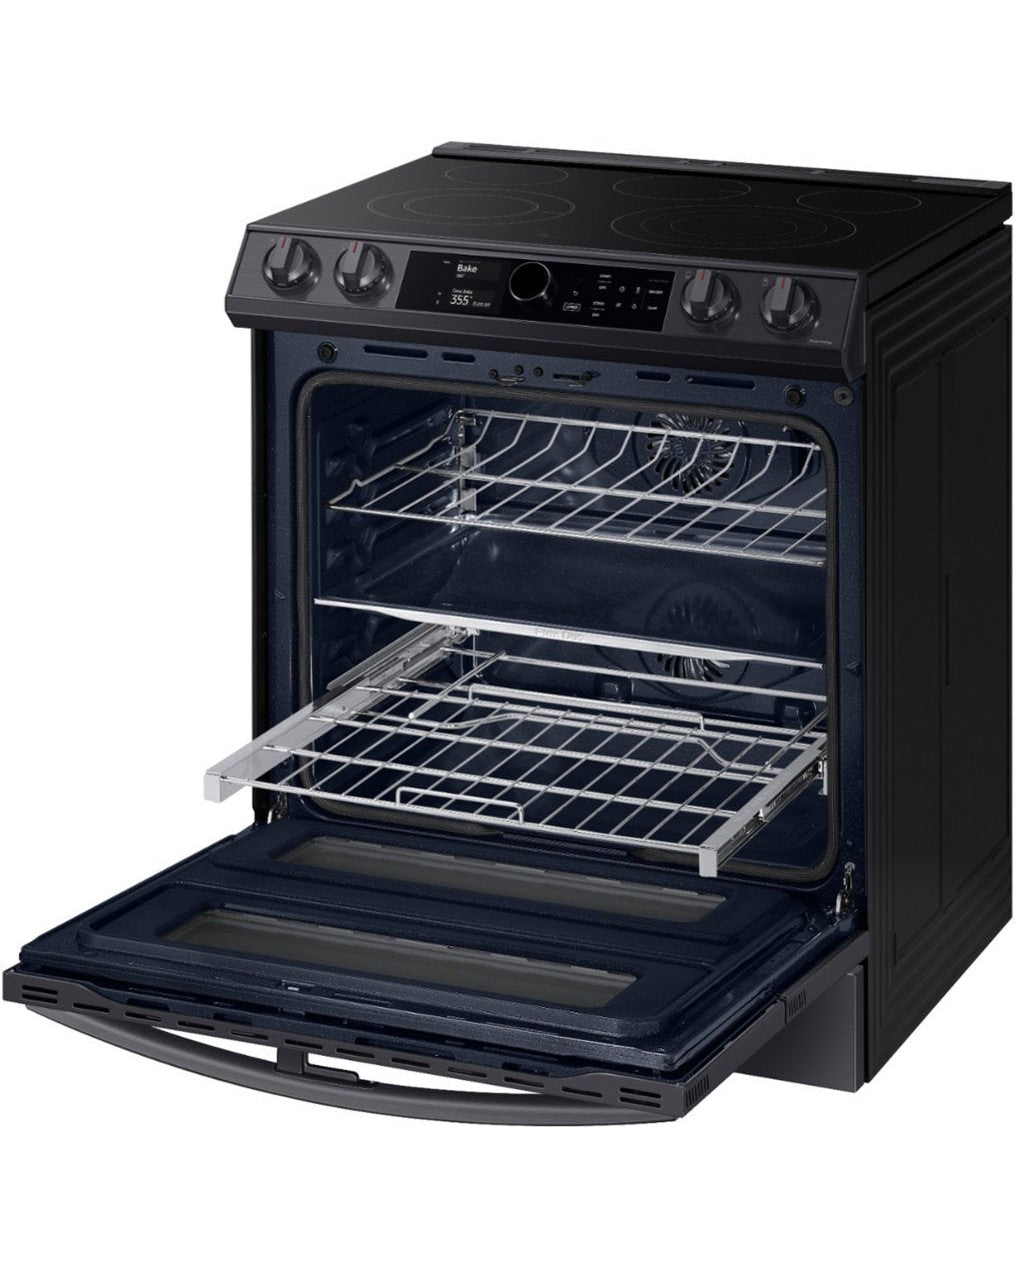 SAMSUNG NE63T8751SG/AA 6.3 cu. ft. Flex Duo Front Control Slide-in Electric Range with Air Fry &amp; Wi-Fi - Black Stainless Steel